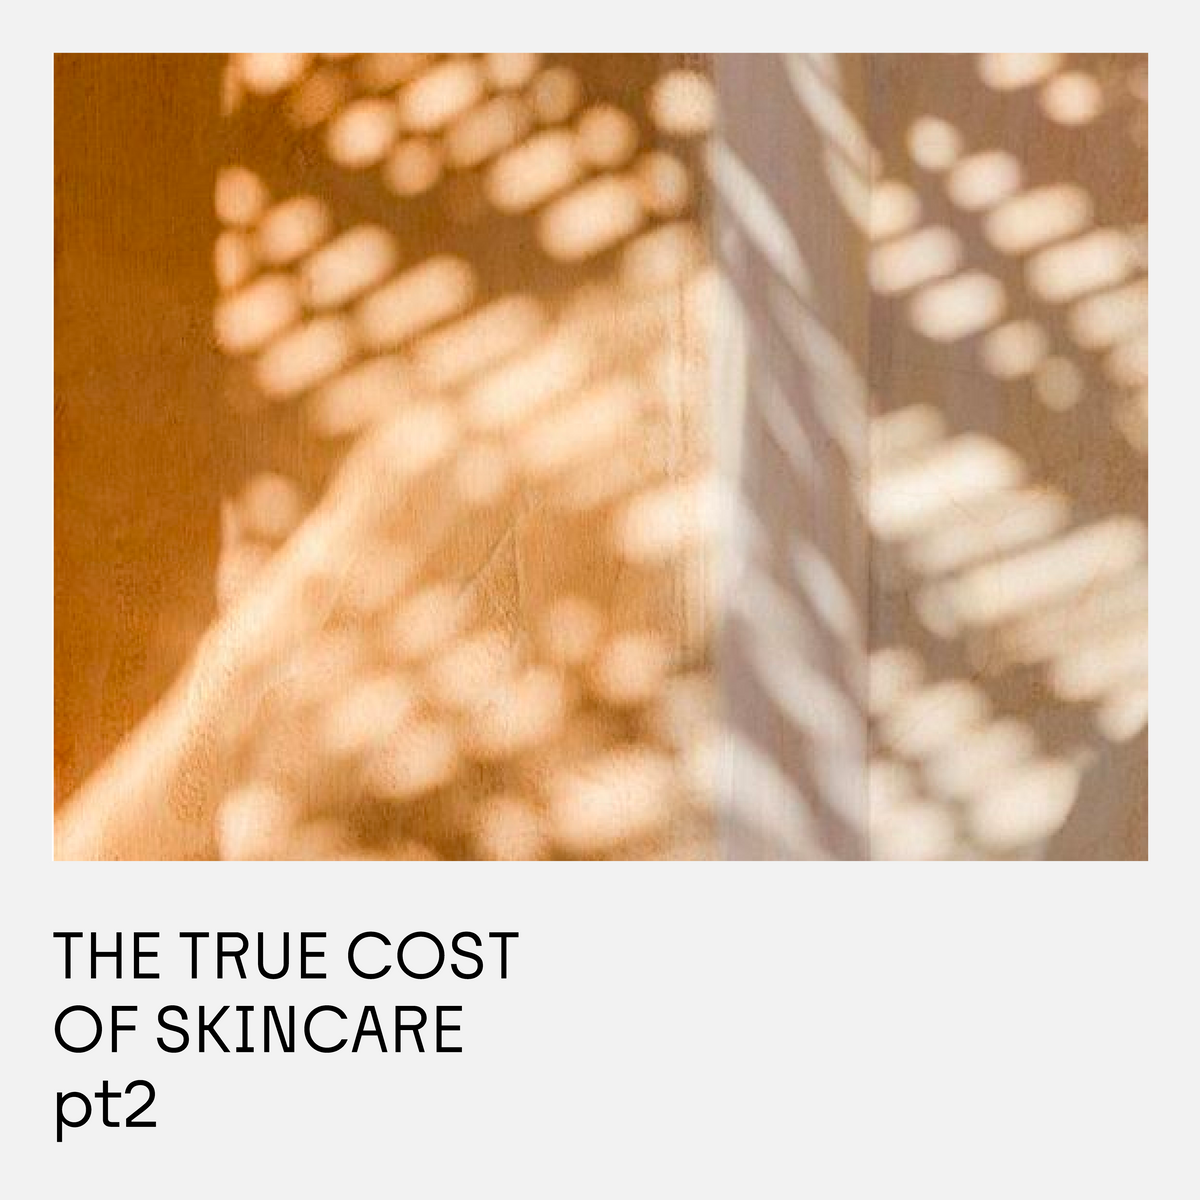 The True Cost of Skincare Part 2